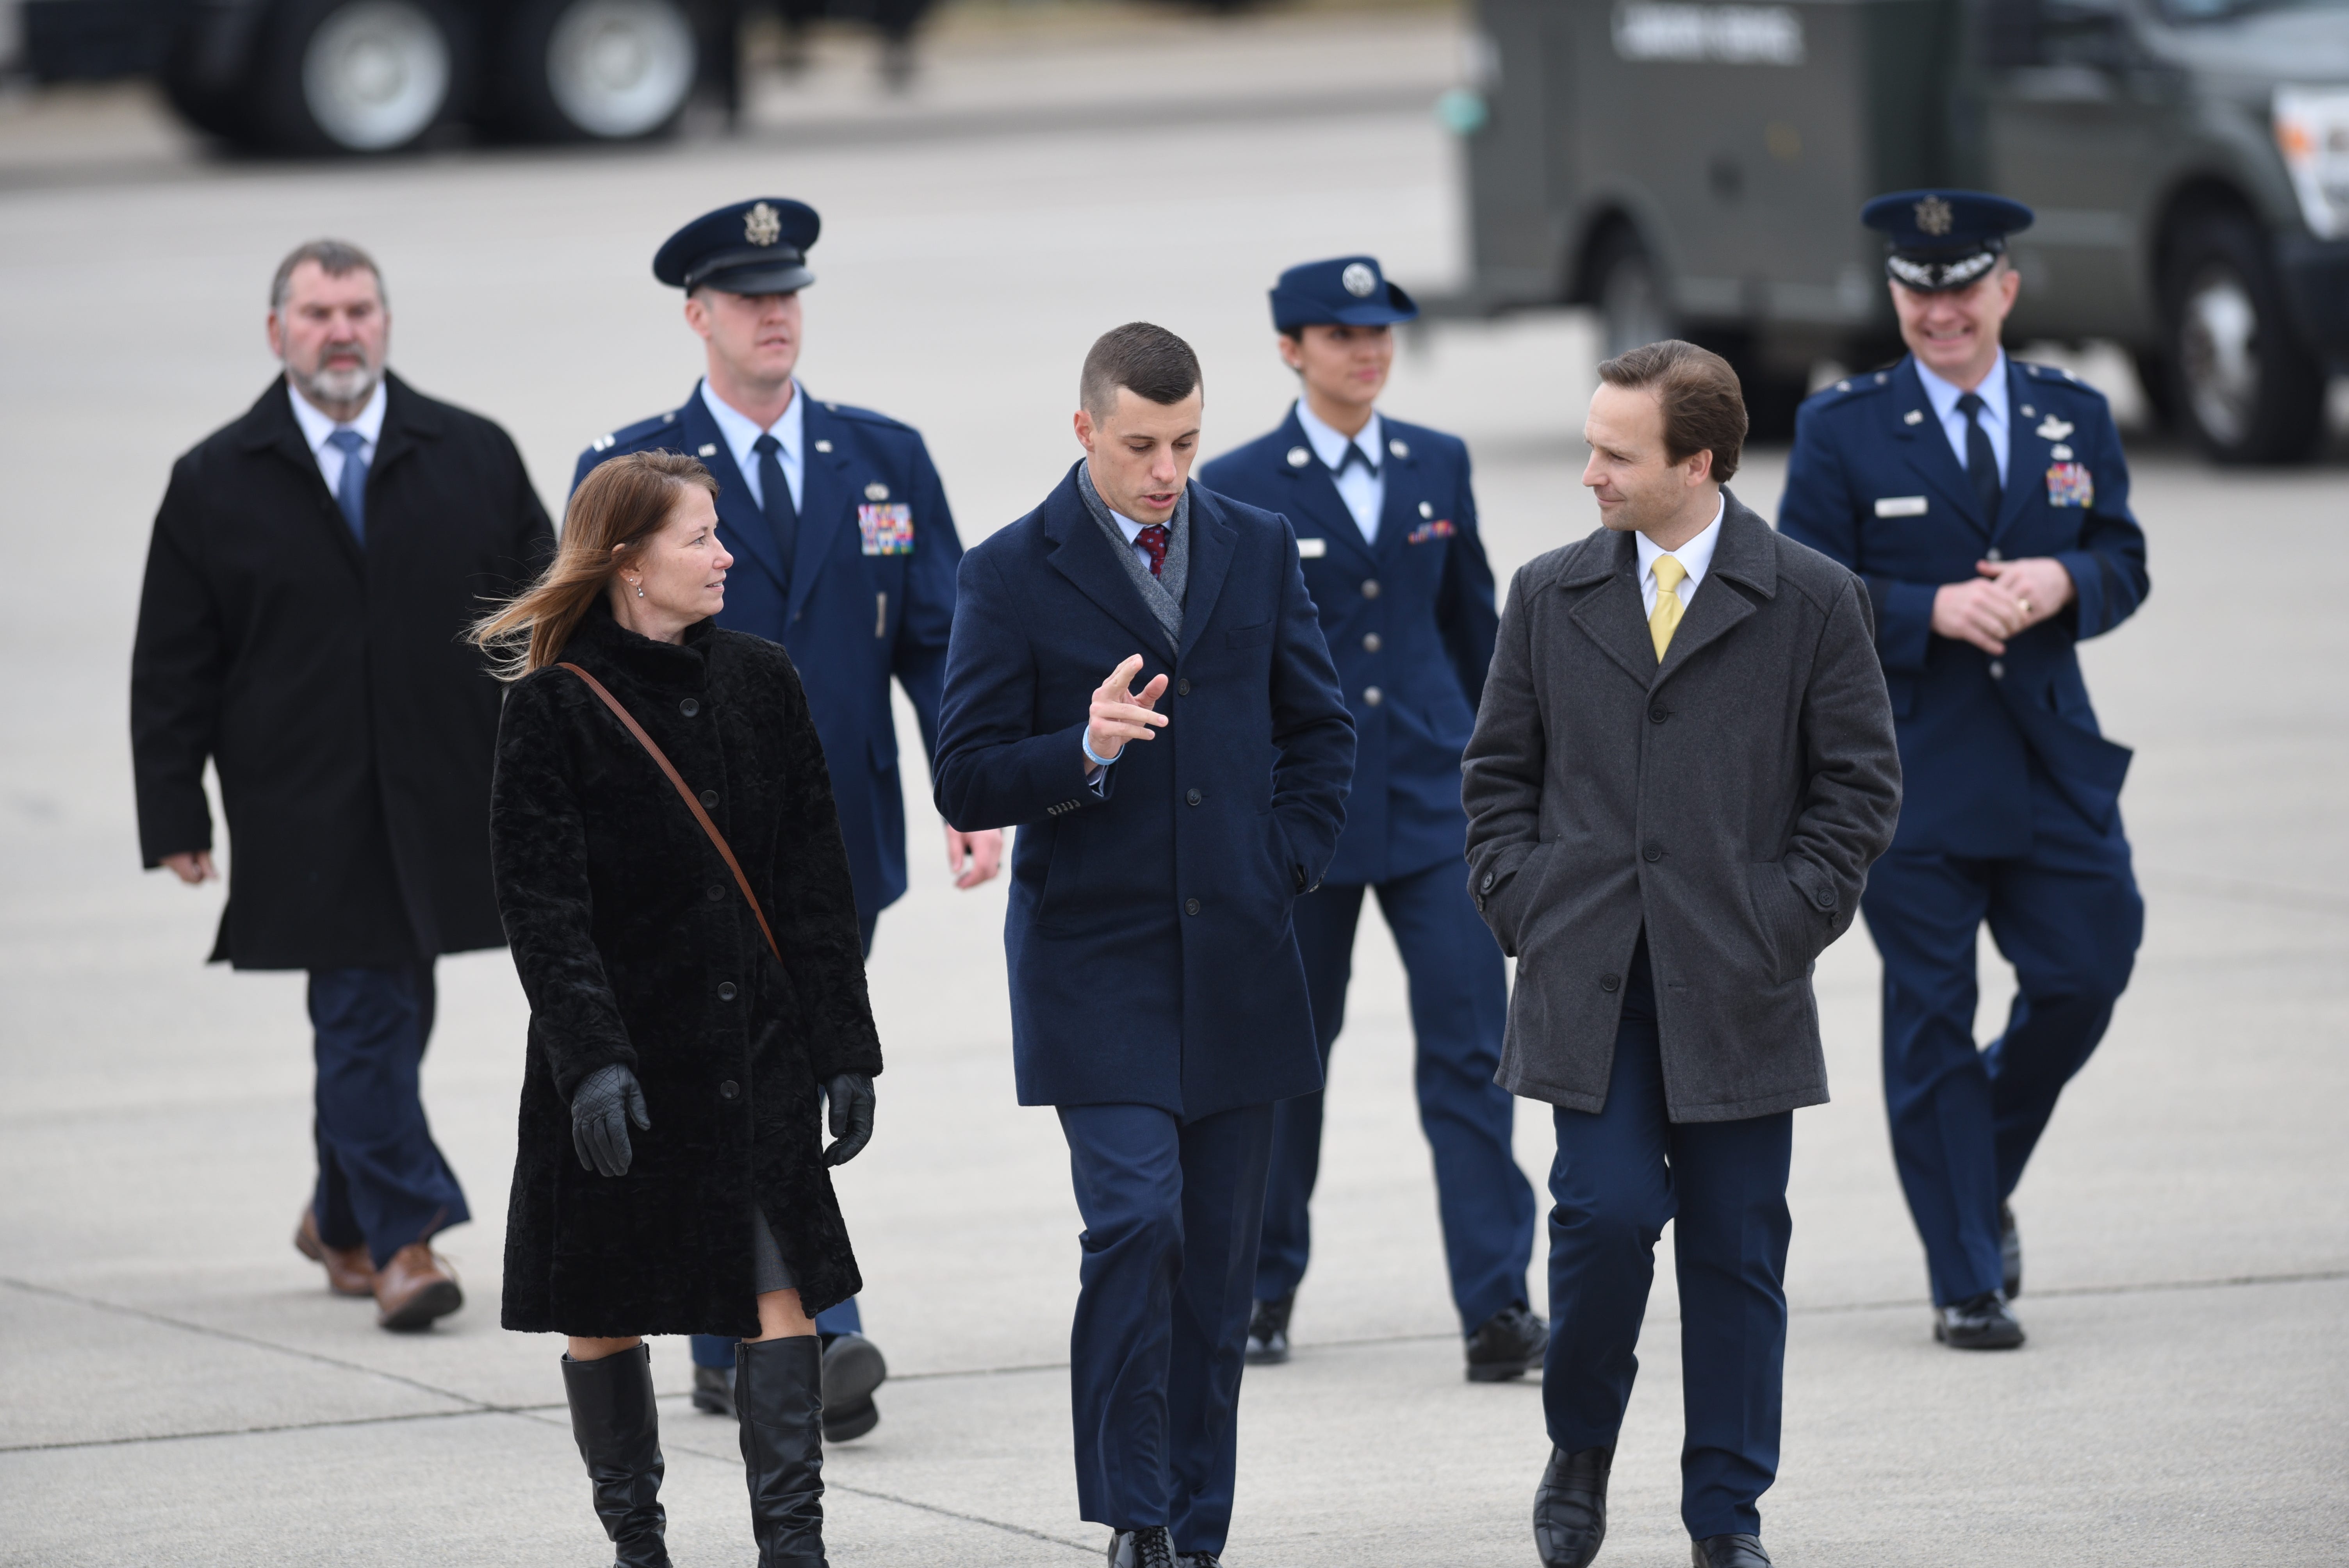 Speaker of the House Lee Chatfield (center), Former Lt. Governor Brian Calley (right) and Michigan State Rep. Diana Farrington, R-Utica, prepare to greet President Donald Trump upon his arrival at Selfridge Air Base in Harrison Township Thursday, January 30, 2020.